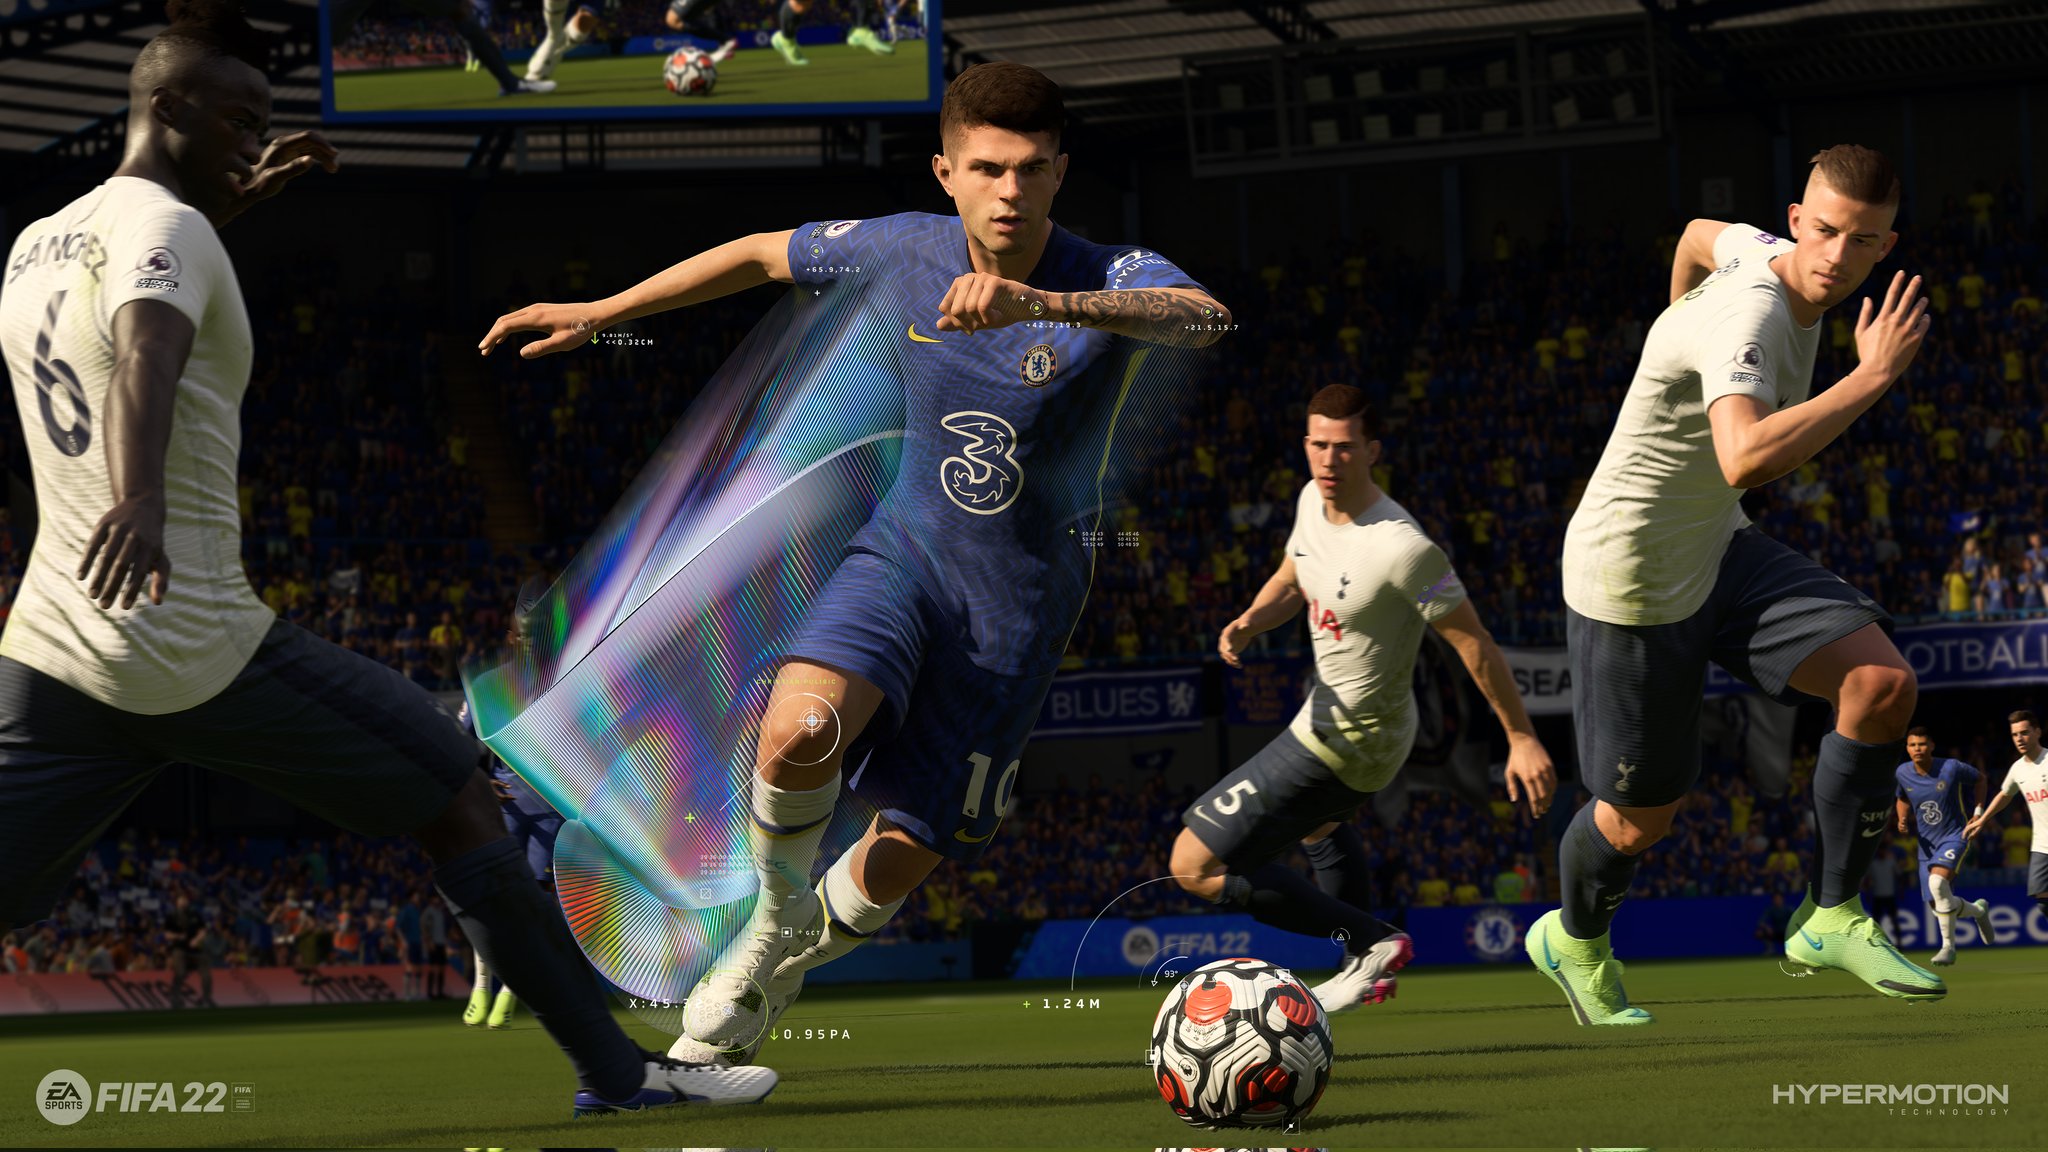 FIFA 22 Gameplay - What Can We Expect